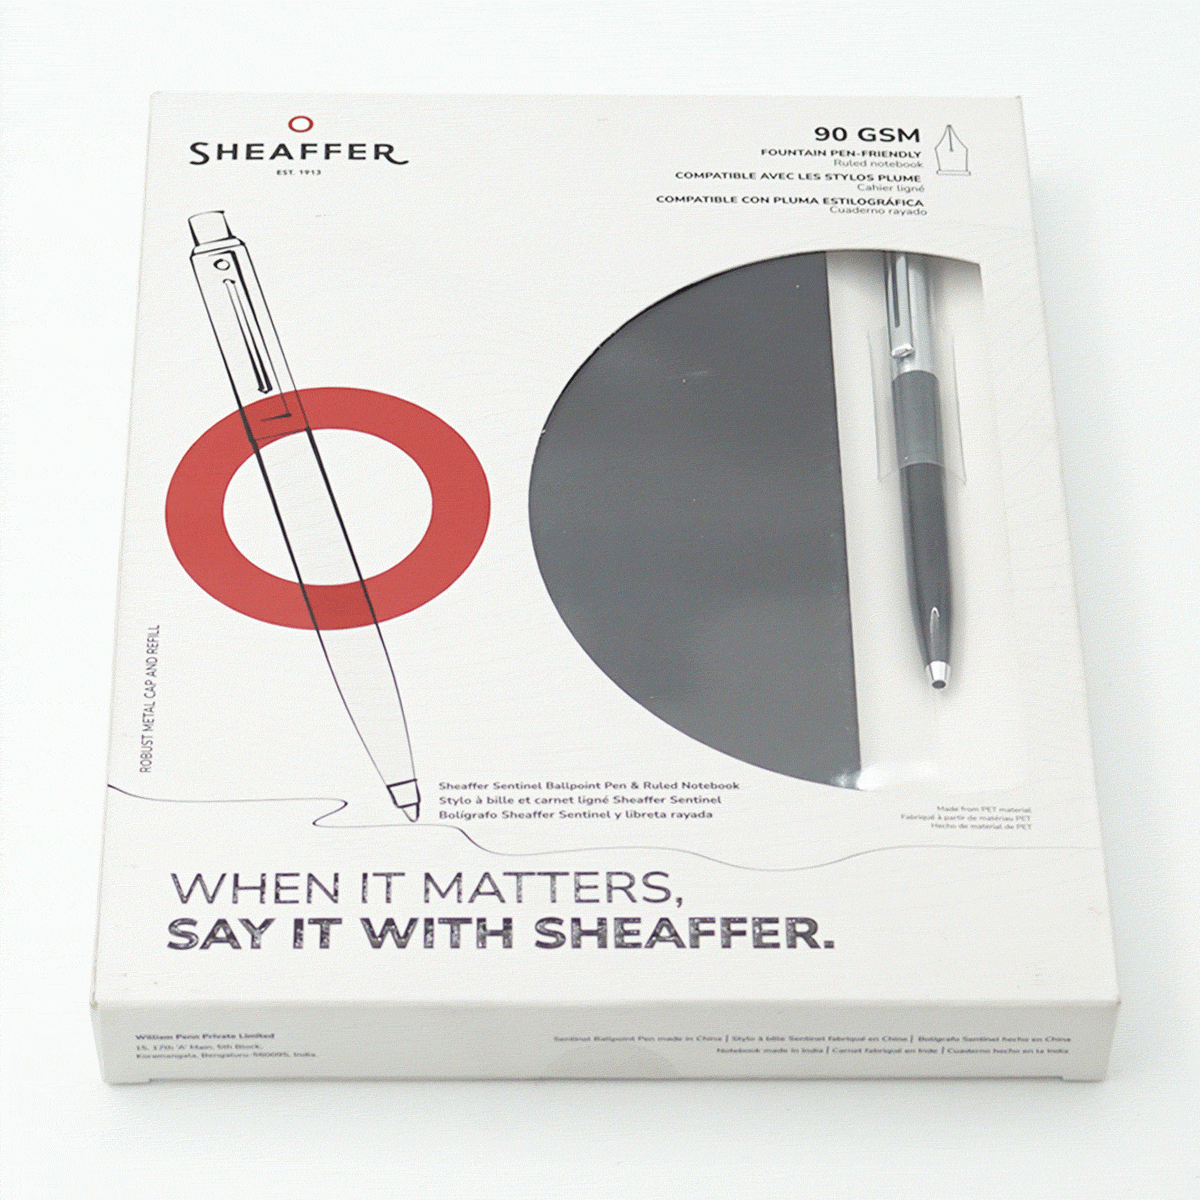 Sheaffer Hangsell Black Color Body With Silver Cap Medium Tip Retractable Type Ball Pen With Diary Pen Set SKU 24163